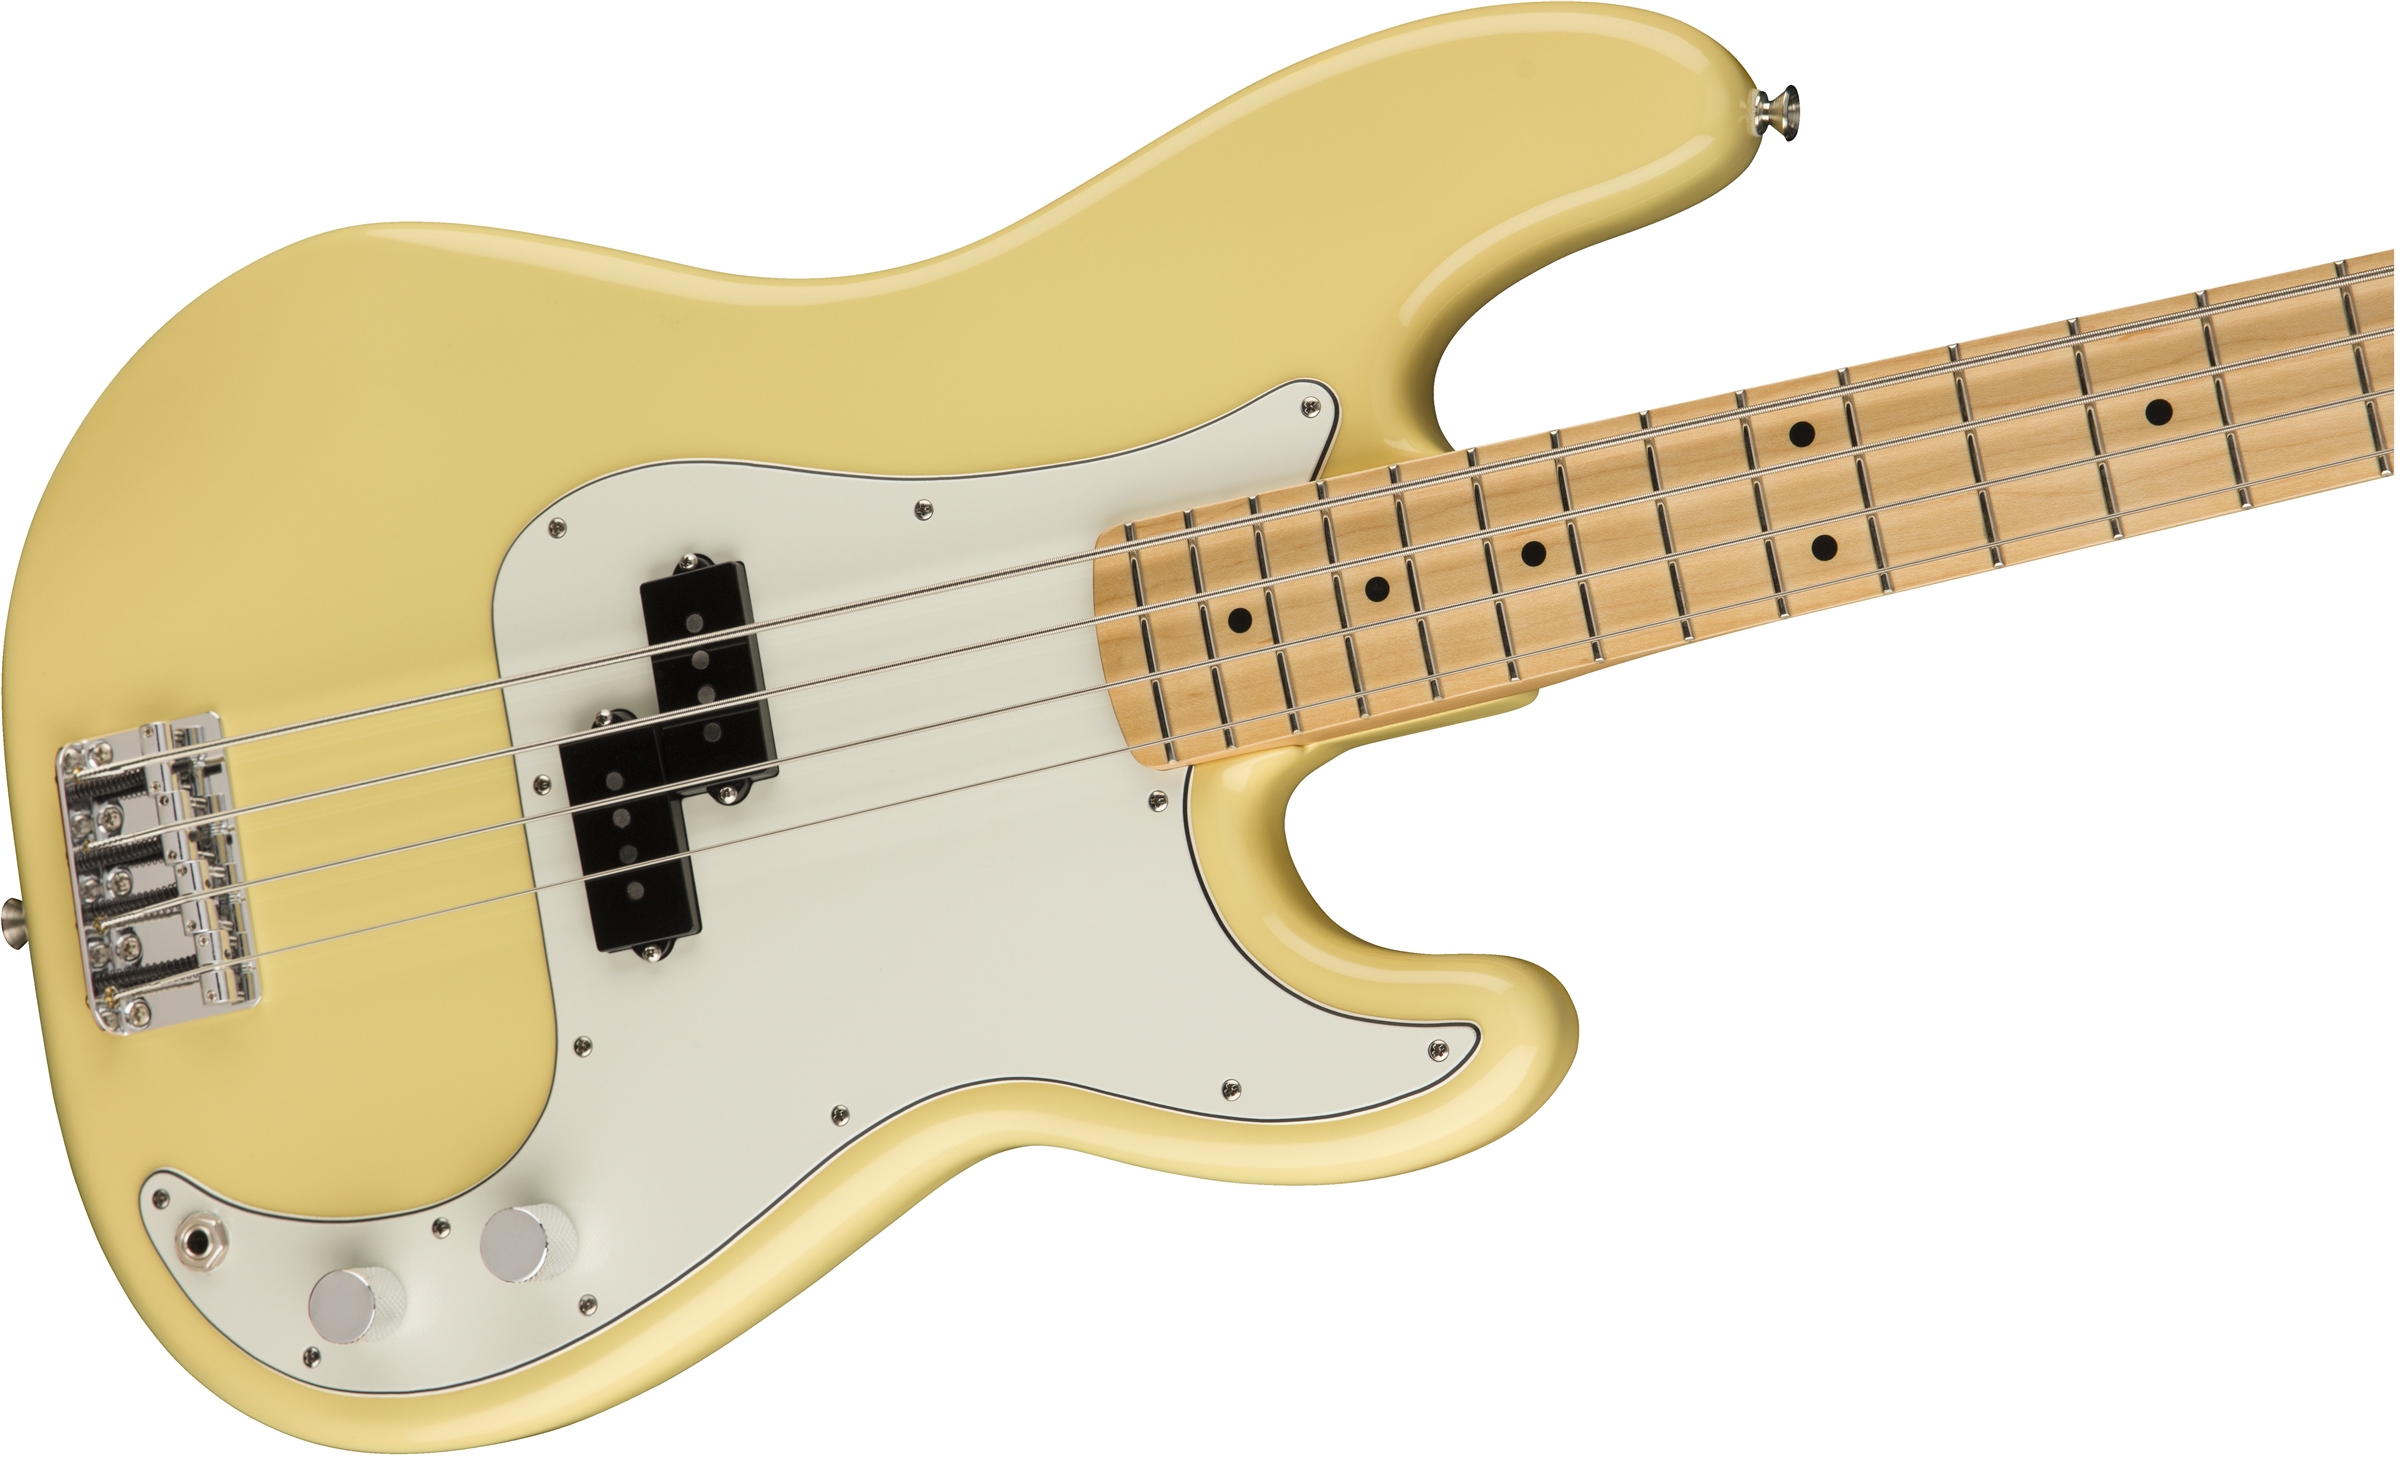 Fender Precision Bass Player Mex Mn - Buttercream - Solid body electric bass - Variation 3